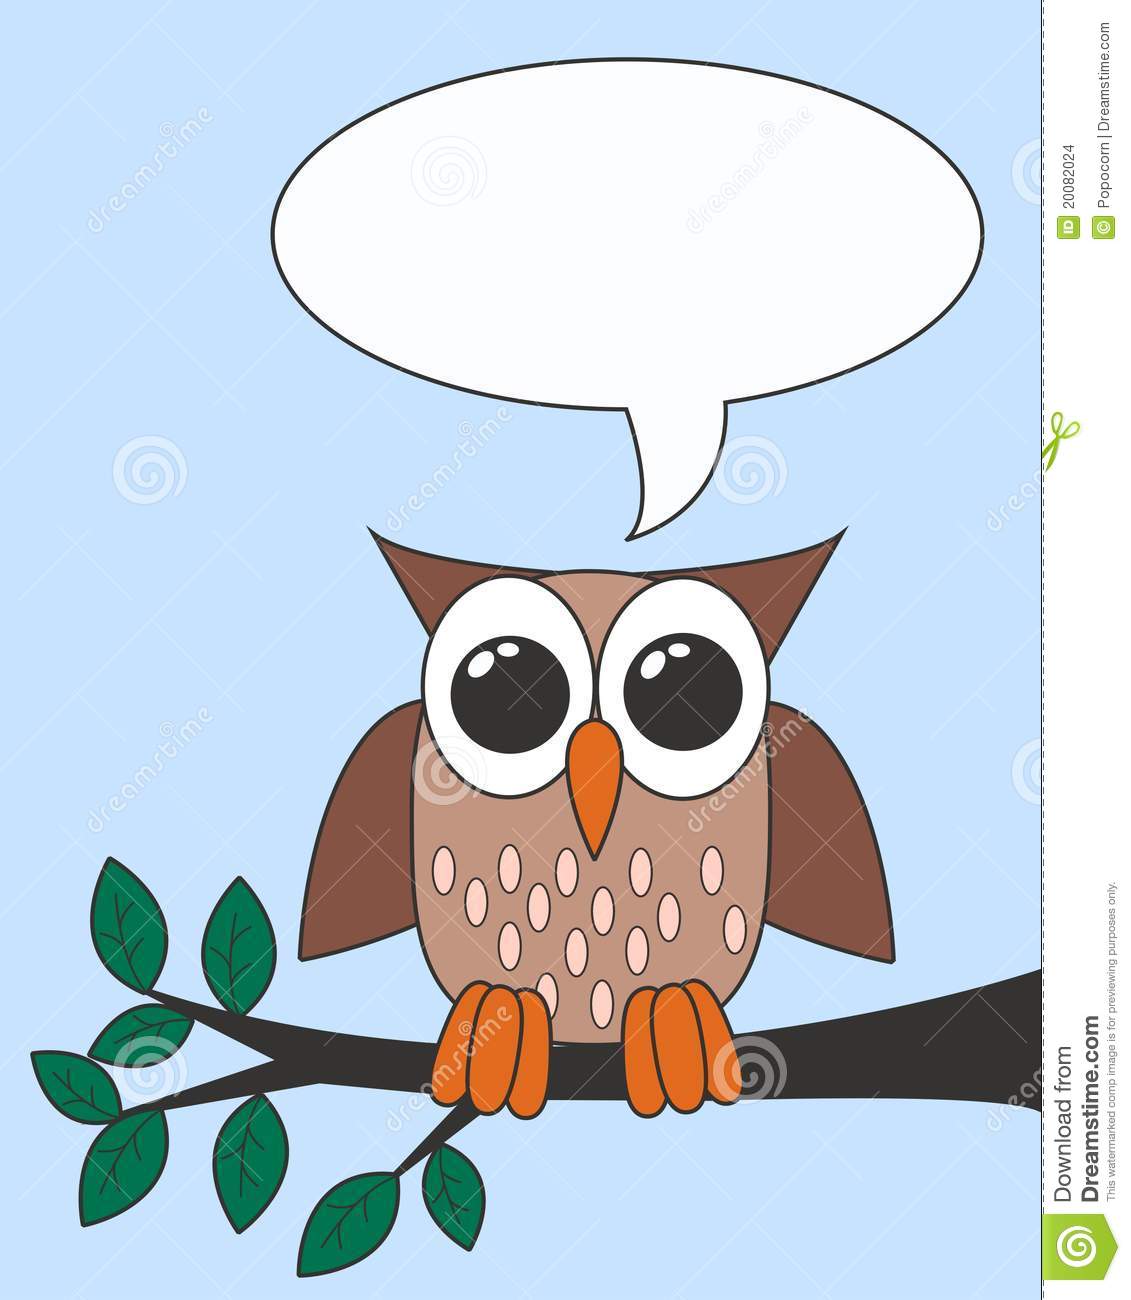 Owl Stock Images   Image  20082024